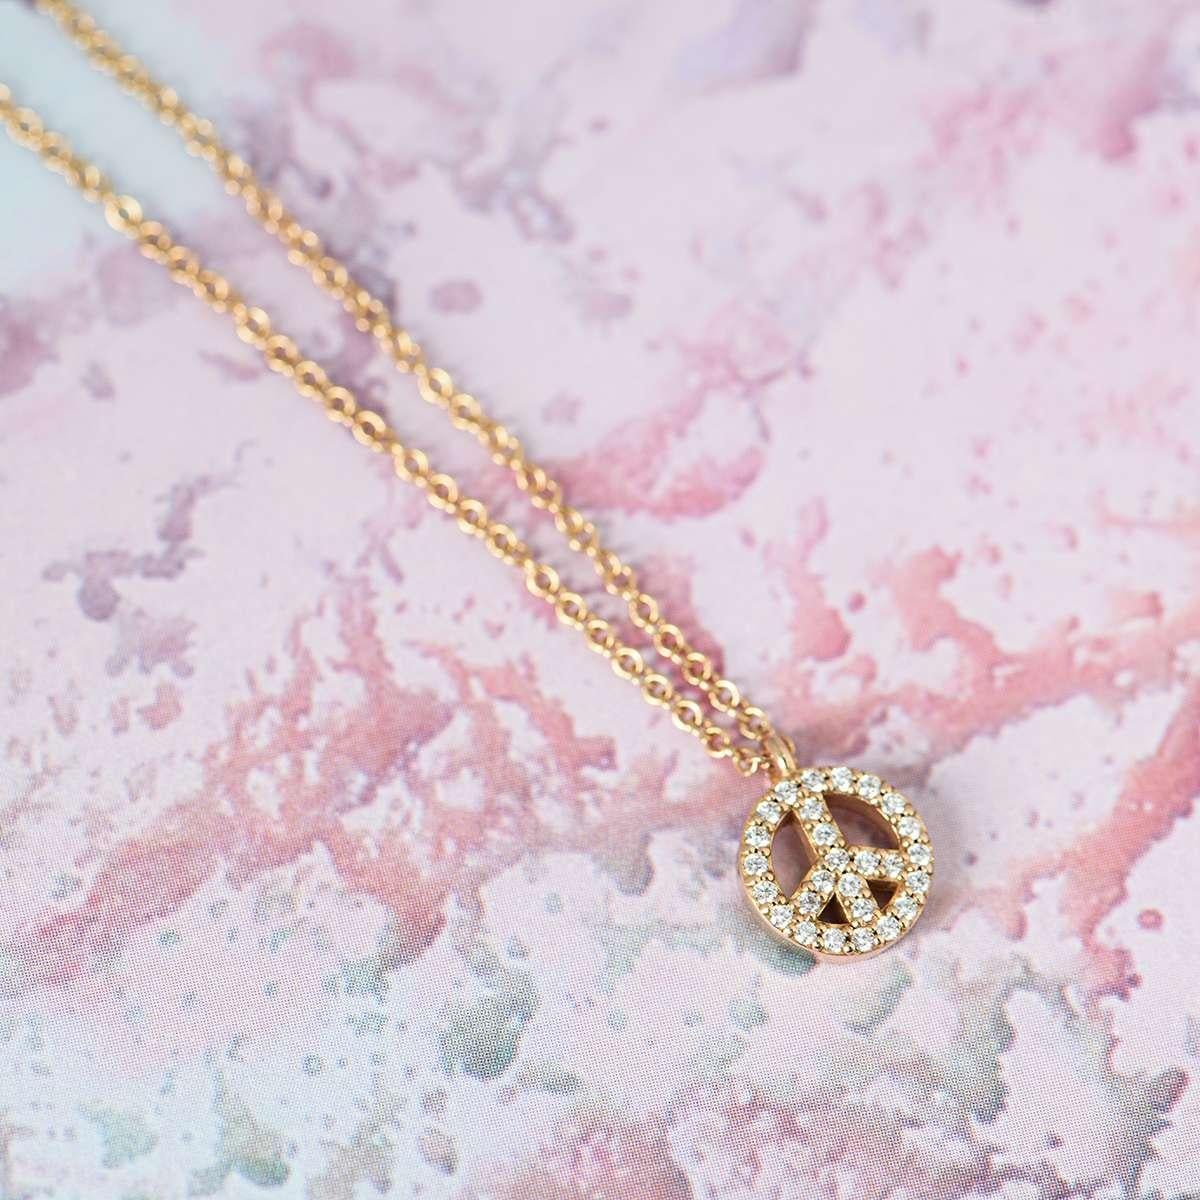 An 18k rose gold diamond Peace pendant from the Metro collection by Tiffany & Co. The pendant features a diamond set Peace symbol, with 27 round brilliant cut diamonds totalling approximately 0.15ct. The pendant measures 7mm in diameter and comes on